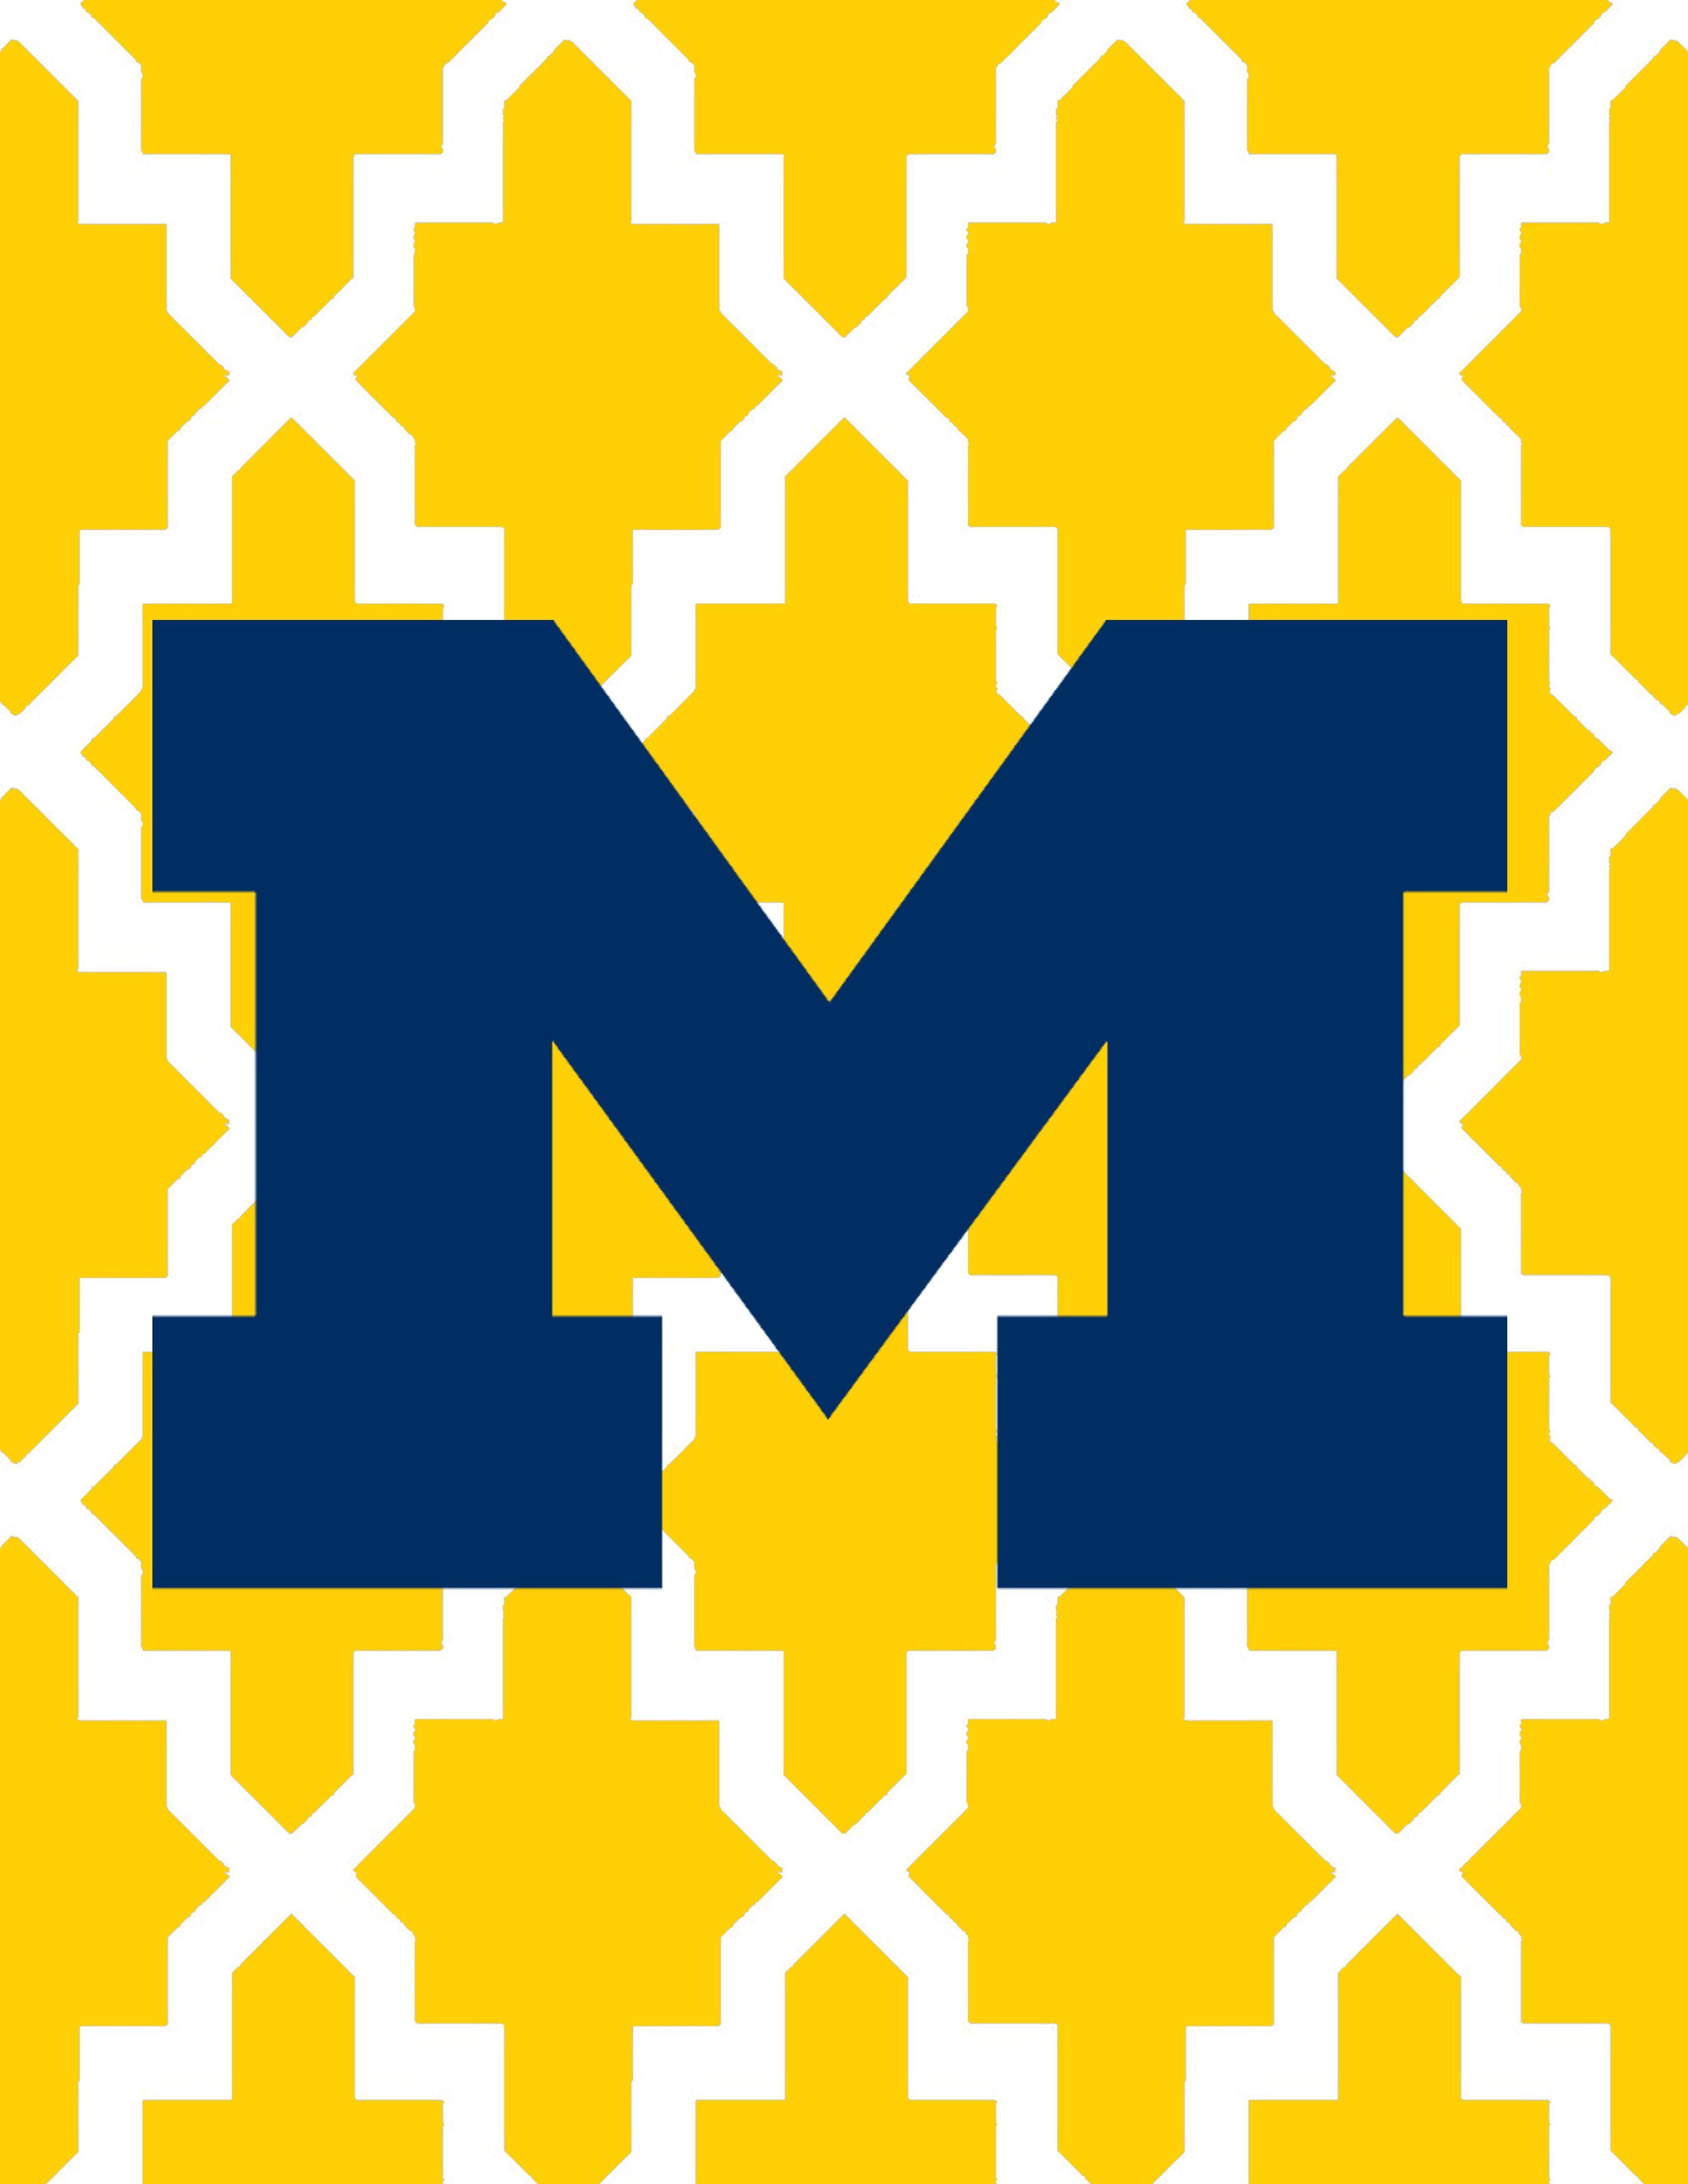 UMich Logo - Download These Exclusive UMich Posters For Your Dorm!. Products I